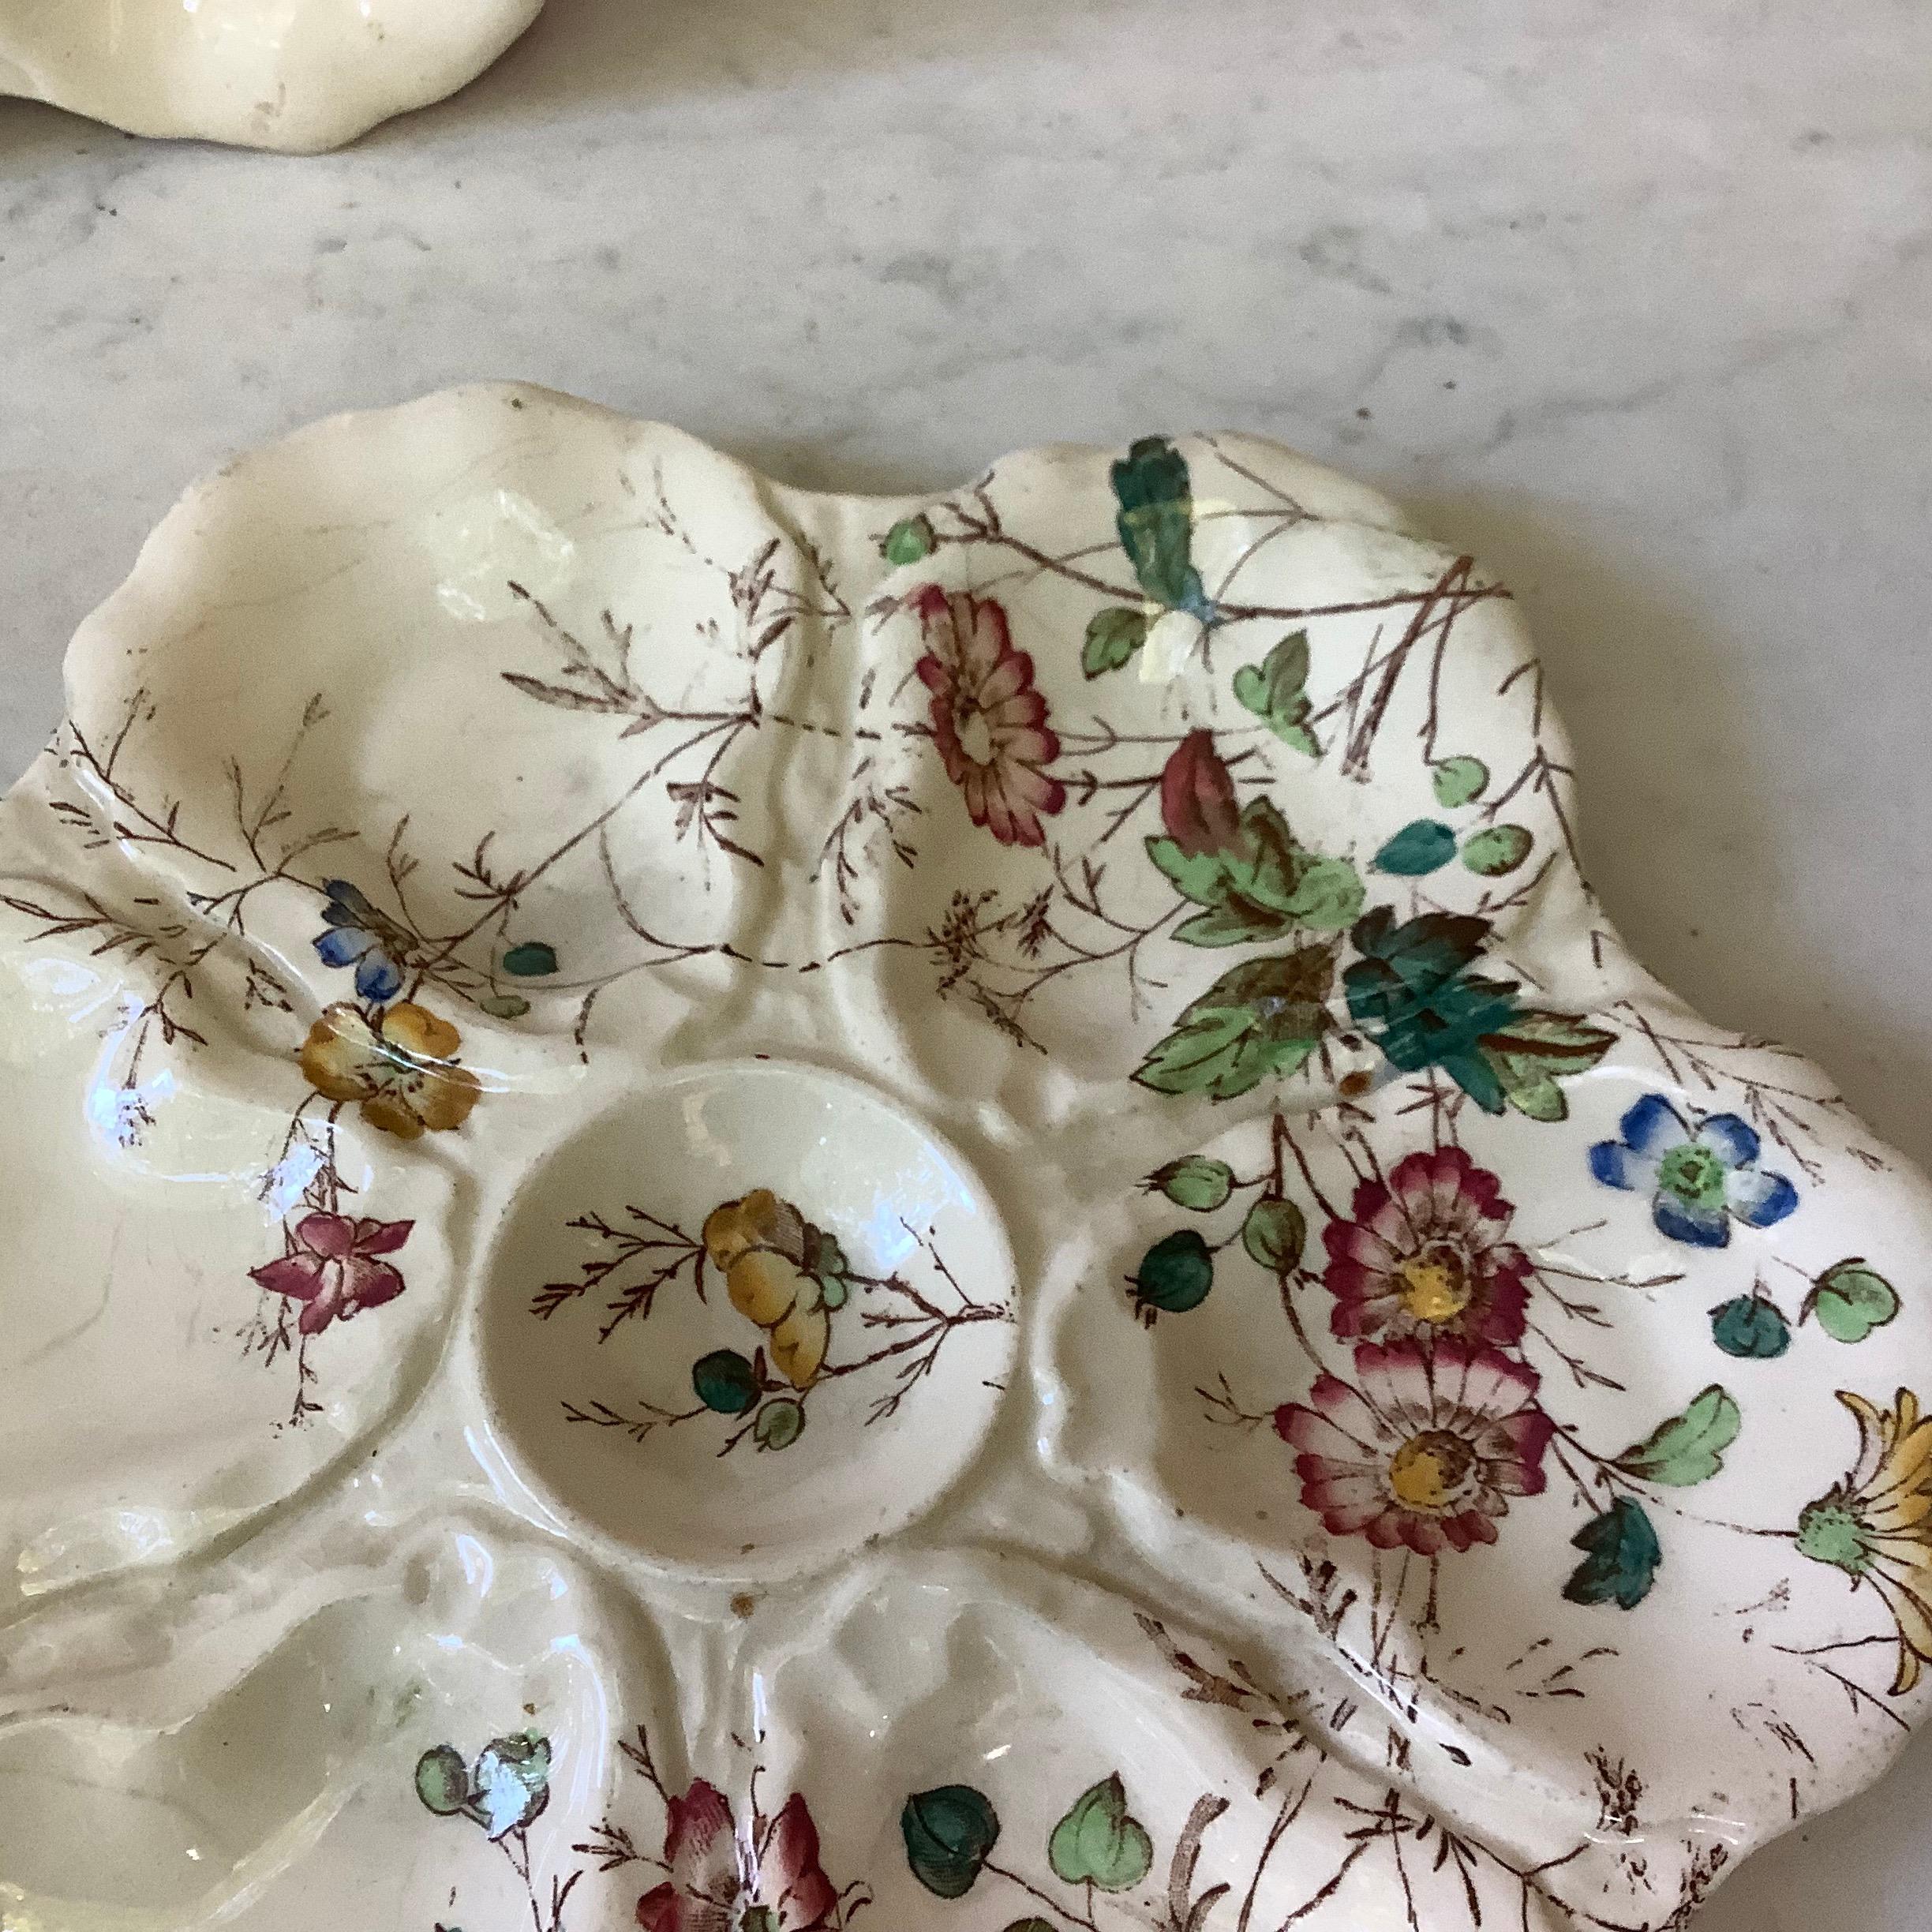 19th century English oyster plate with flowers and butterflies Adderley ware.